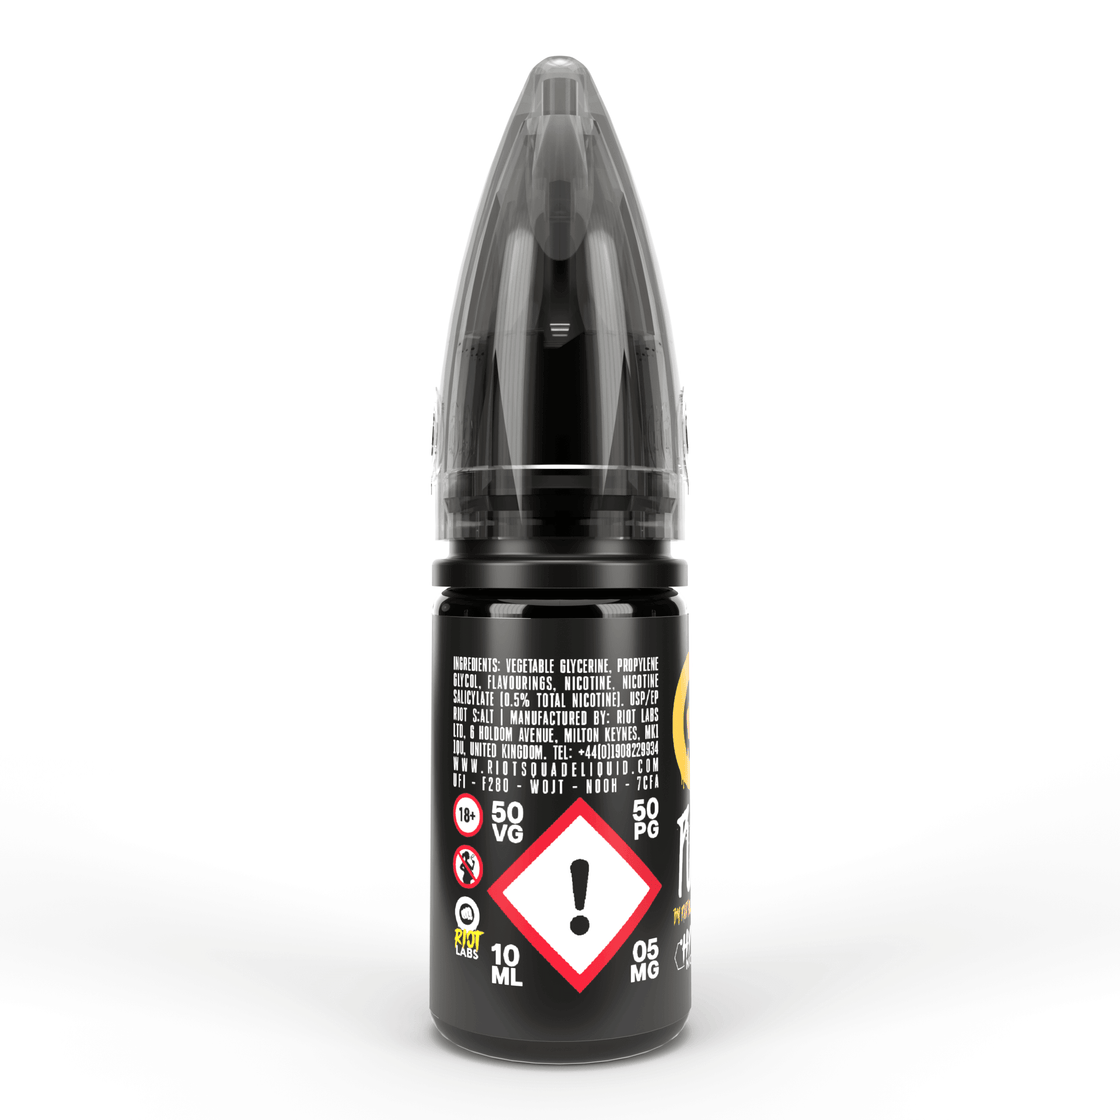 GUAVA, PASSIONFRUIT & PINEAPPLE - PUNX BY RIOT - 10ML NIC SALT E-LIQUID - 5MG | 10MG | 20MG BY RIOT SQUAD - Vapeslough